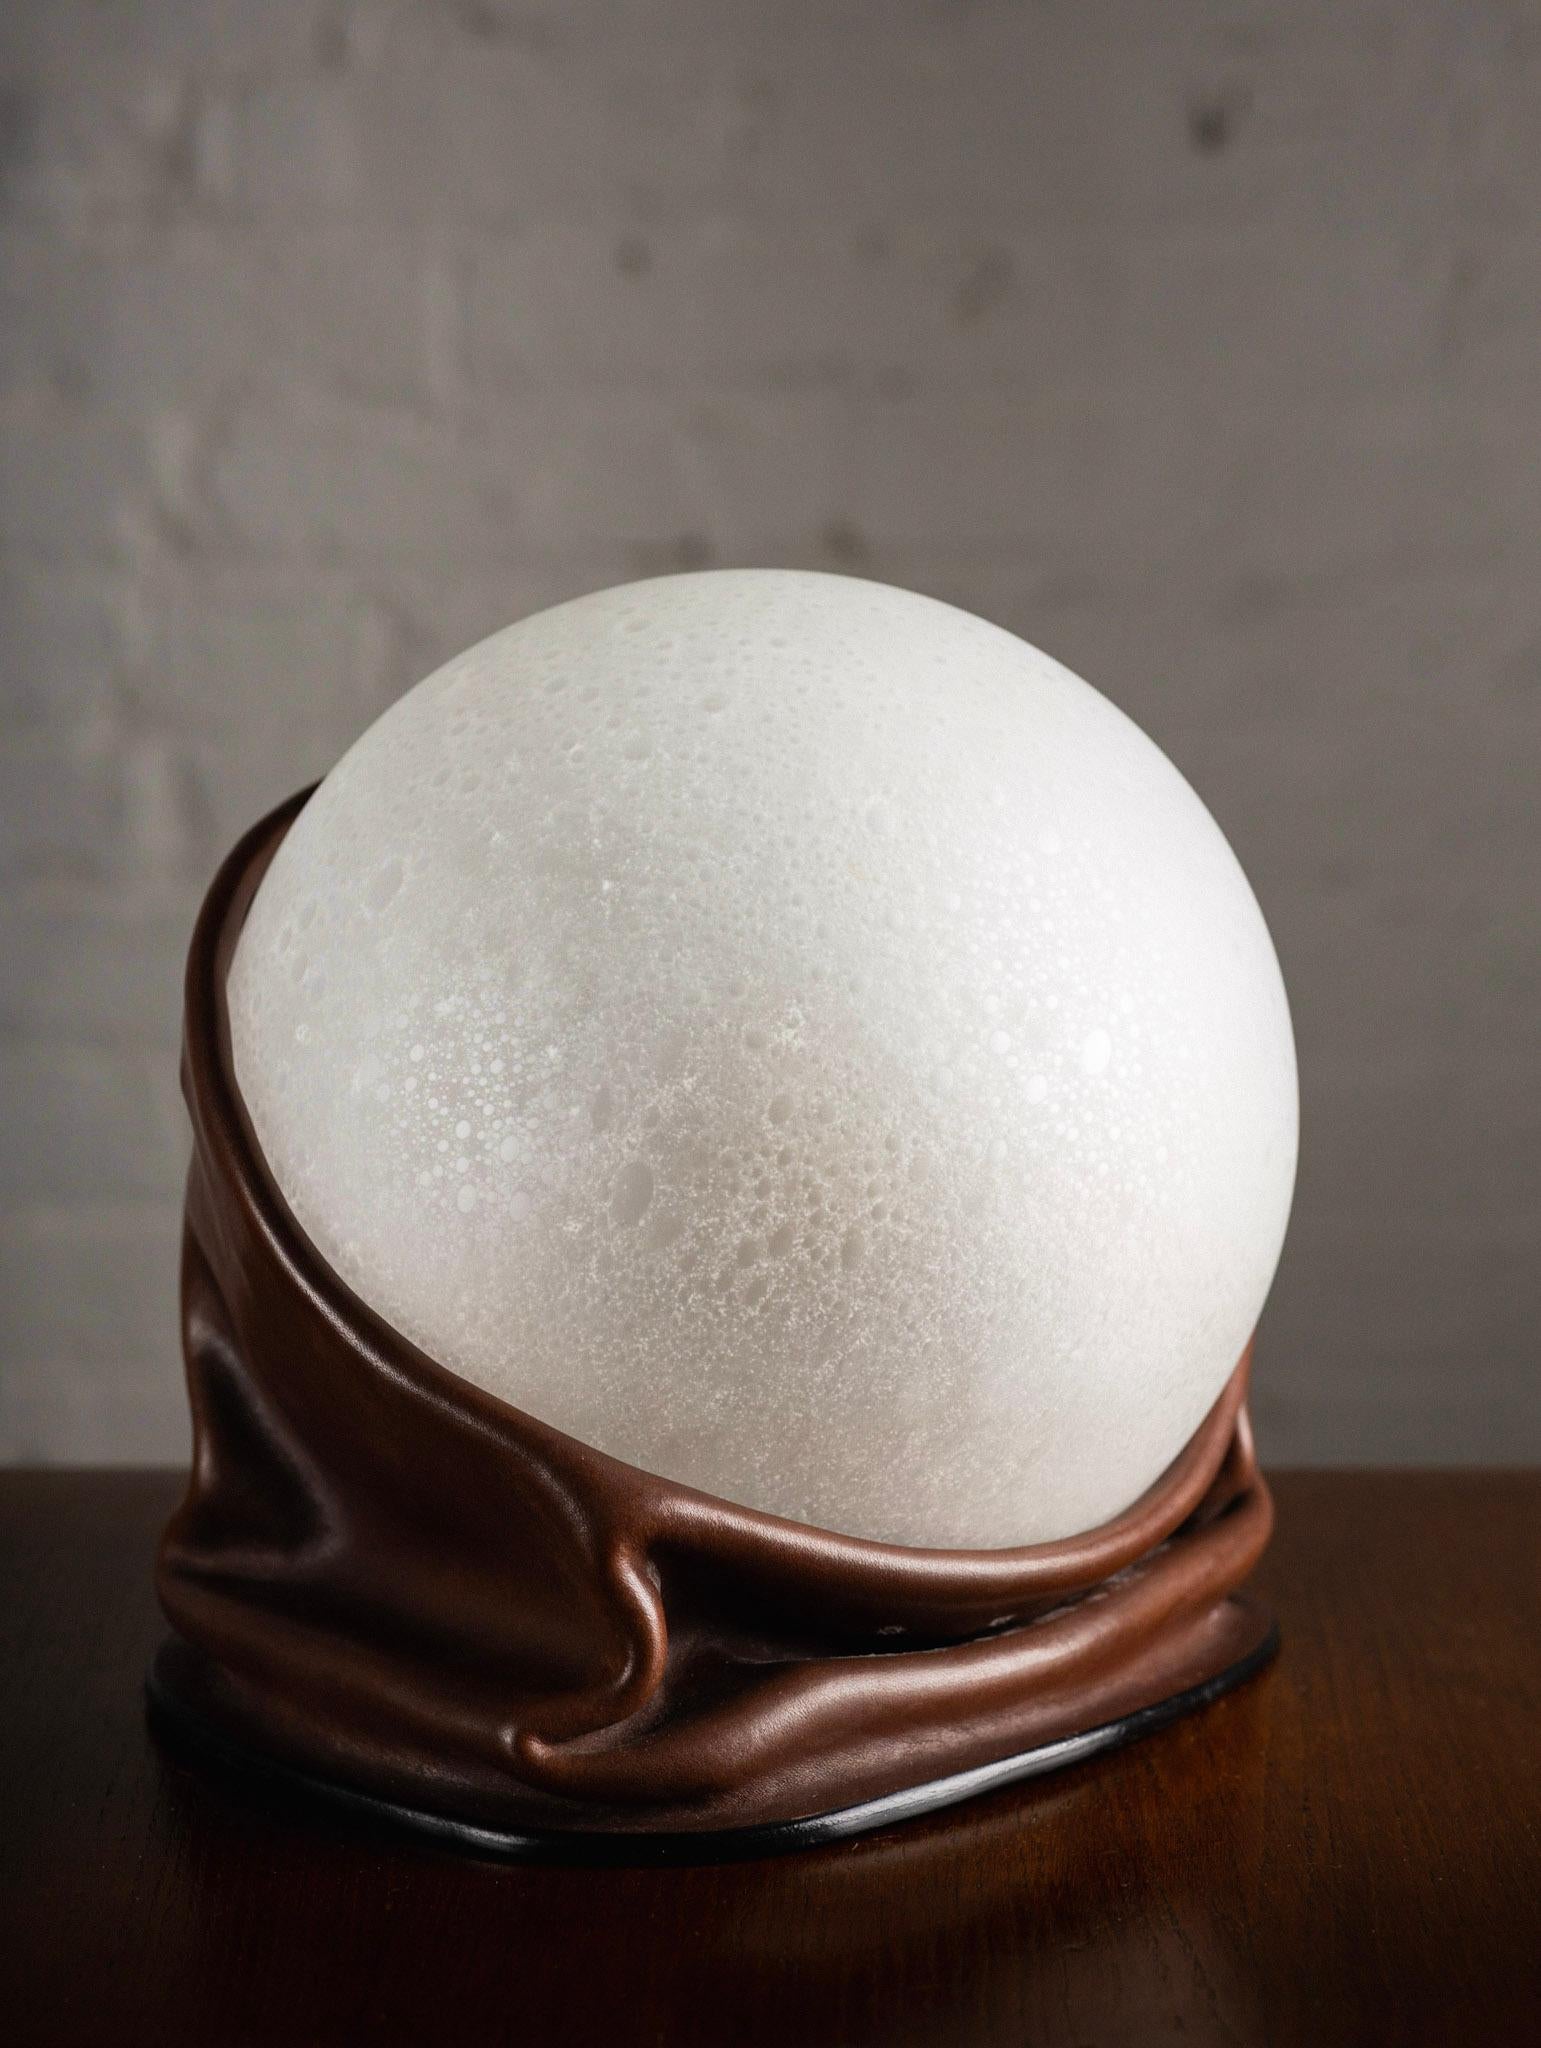 Italian space age leather and glass table lamp. Draped leather base holds a frosted speckled blown glass orb. Signed Nova Tecno. Sourced outside of Florence, Italy.

Orb measures 9” in diameter.